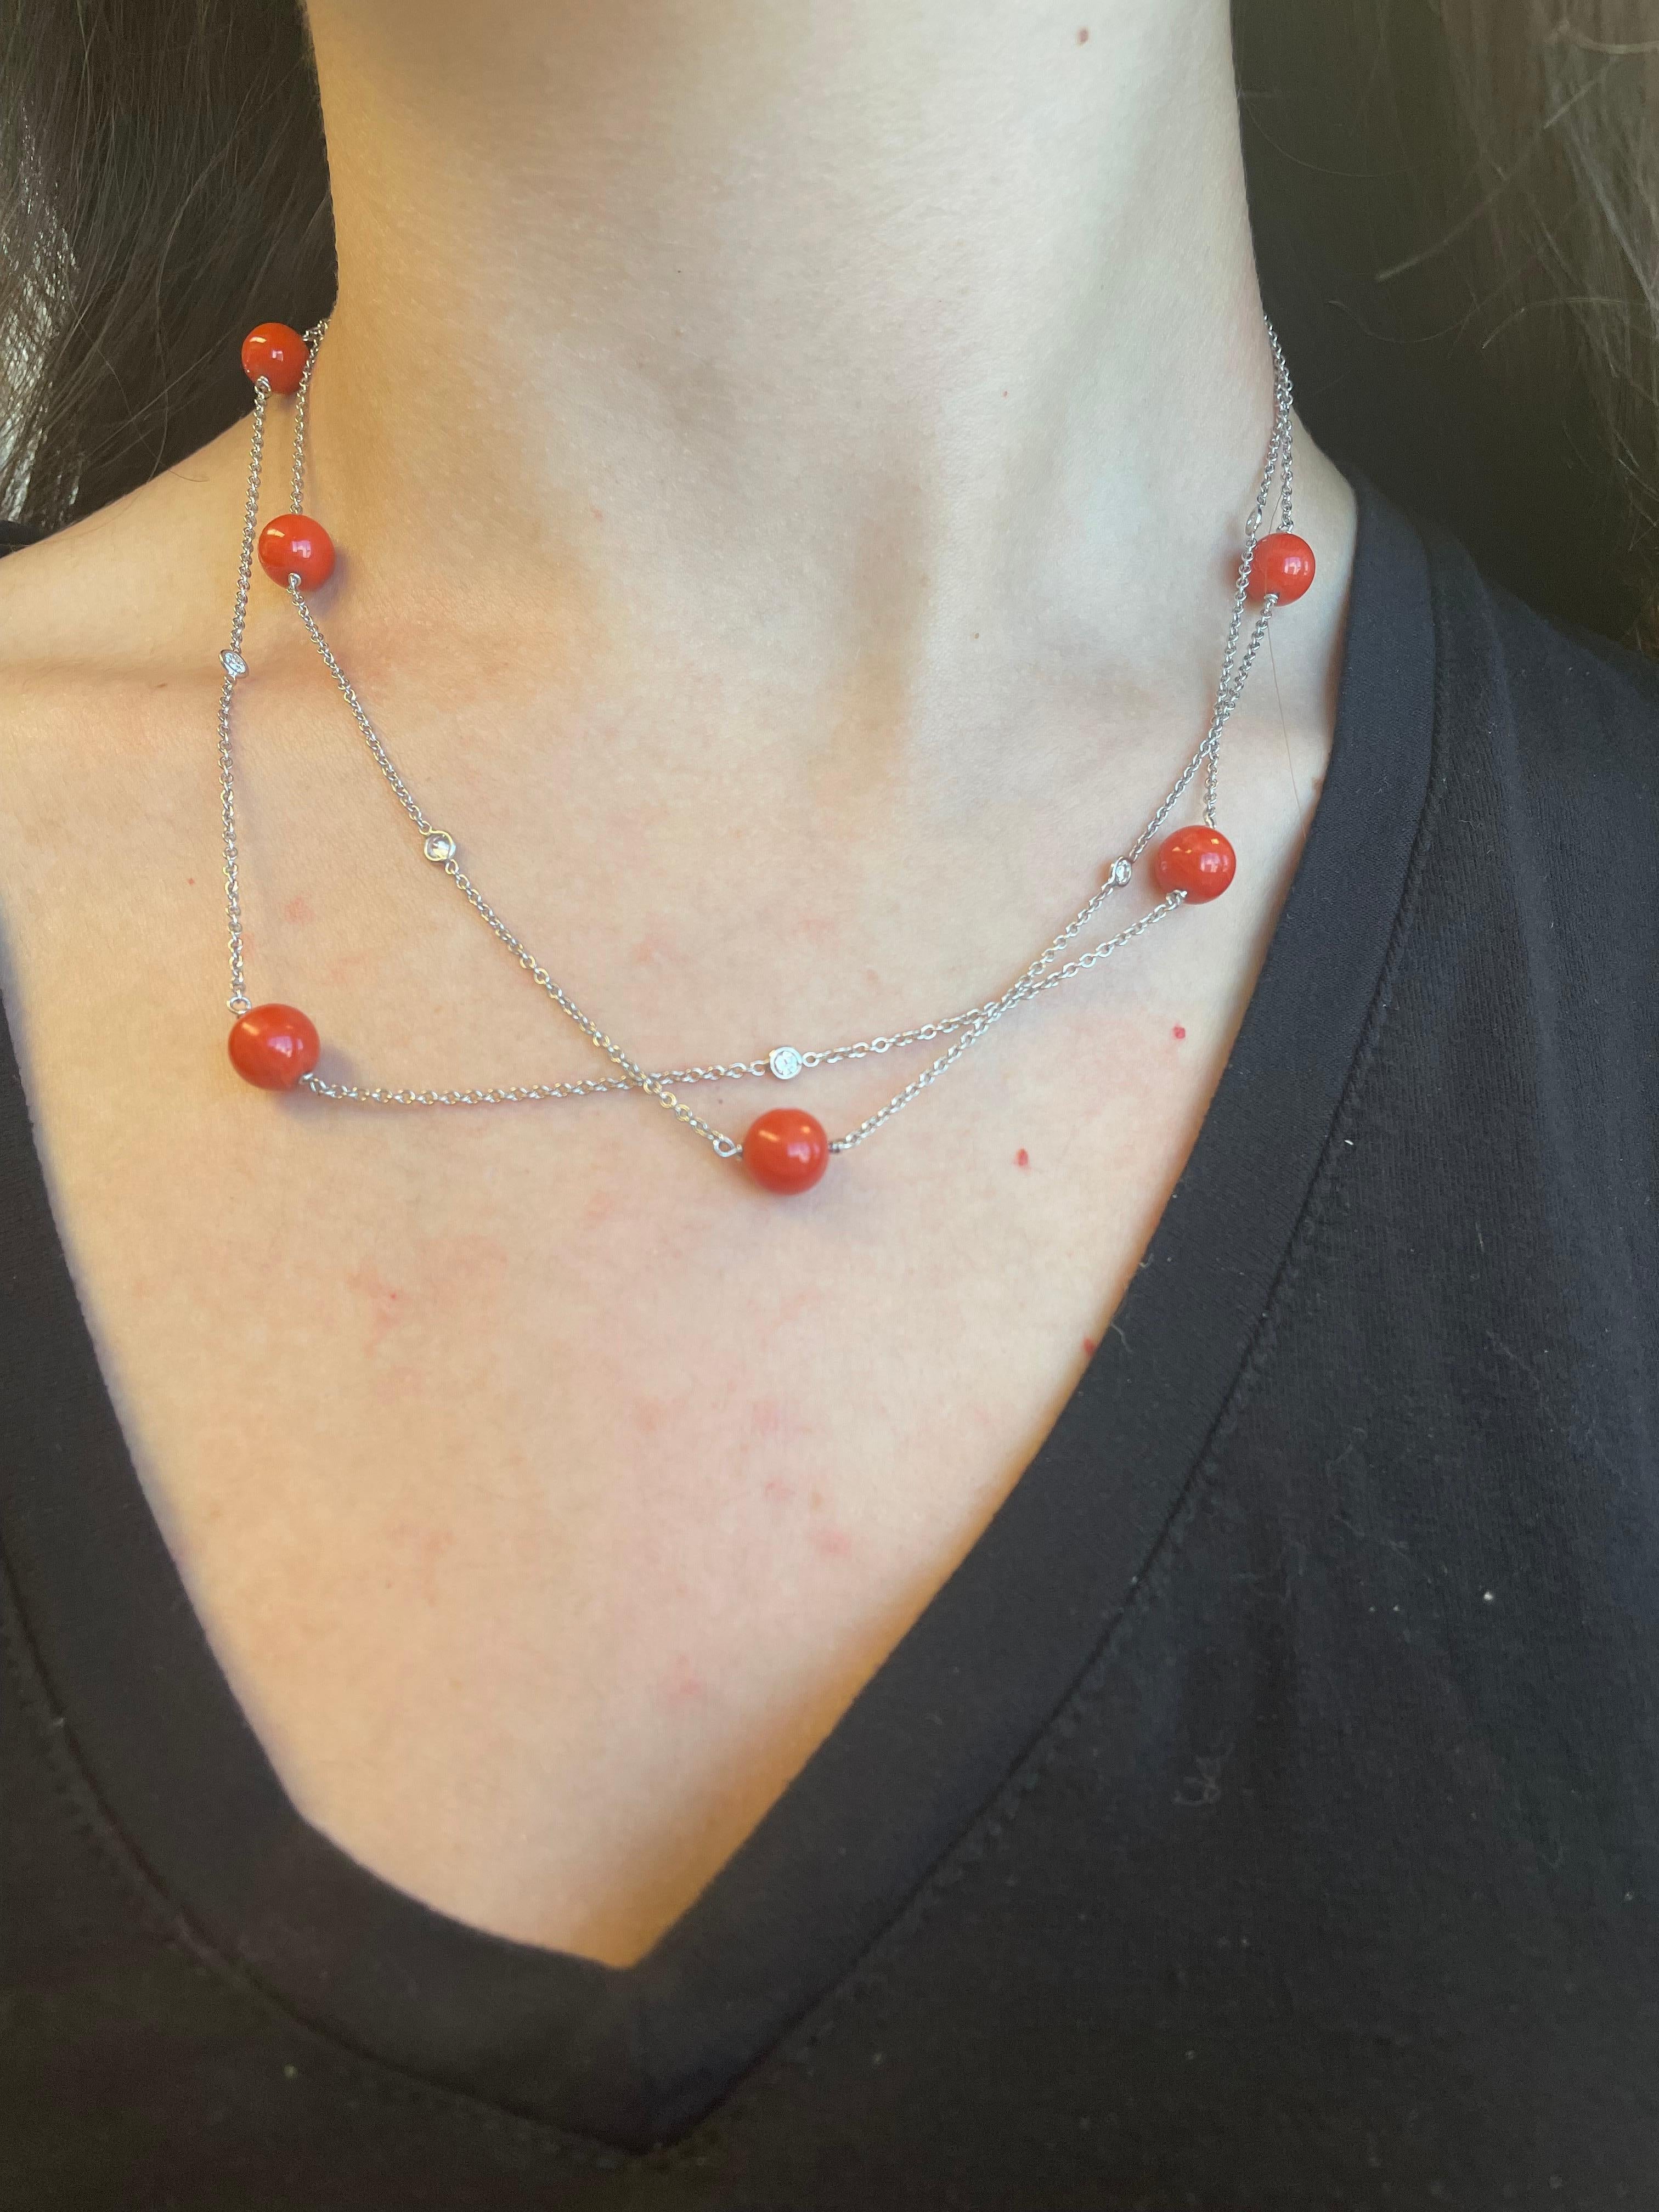 Pretty diamond by the yard and coral necklace, can be doubled. 
6 round brilliant diamonds, 0.71 carats. Approximately G/H color and SI clarity. 6 beaded coal, 18k white gold.
Accommodated with an up-to-date digital appraisal by a GIA G.G. once